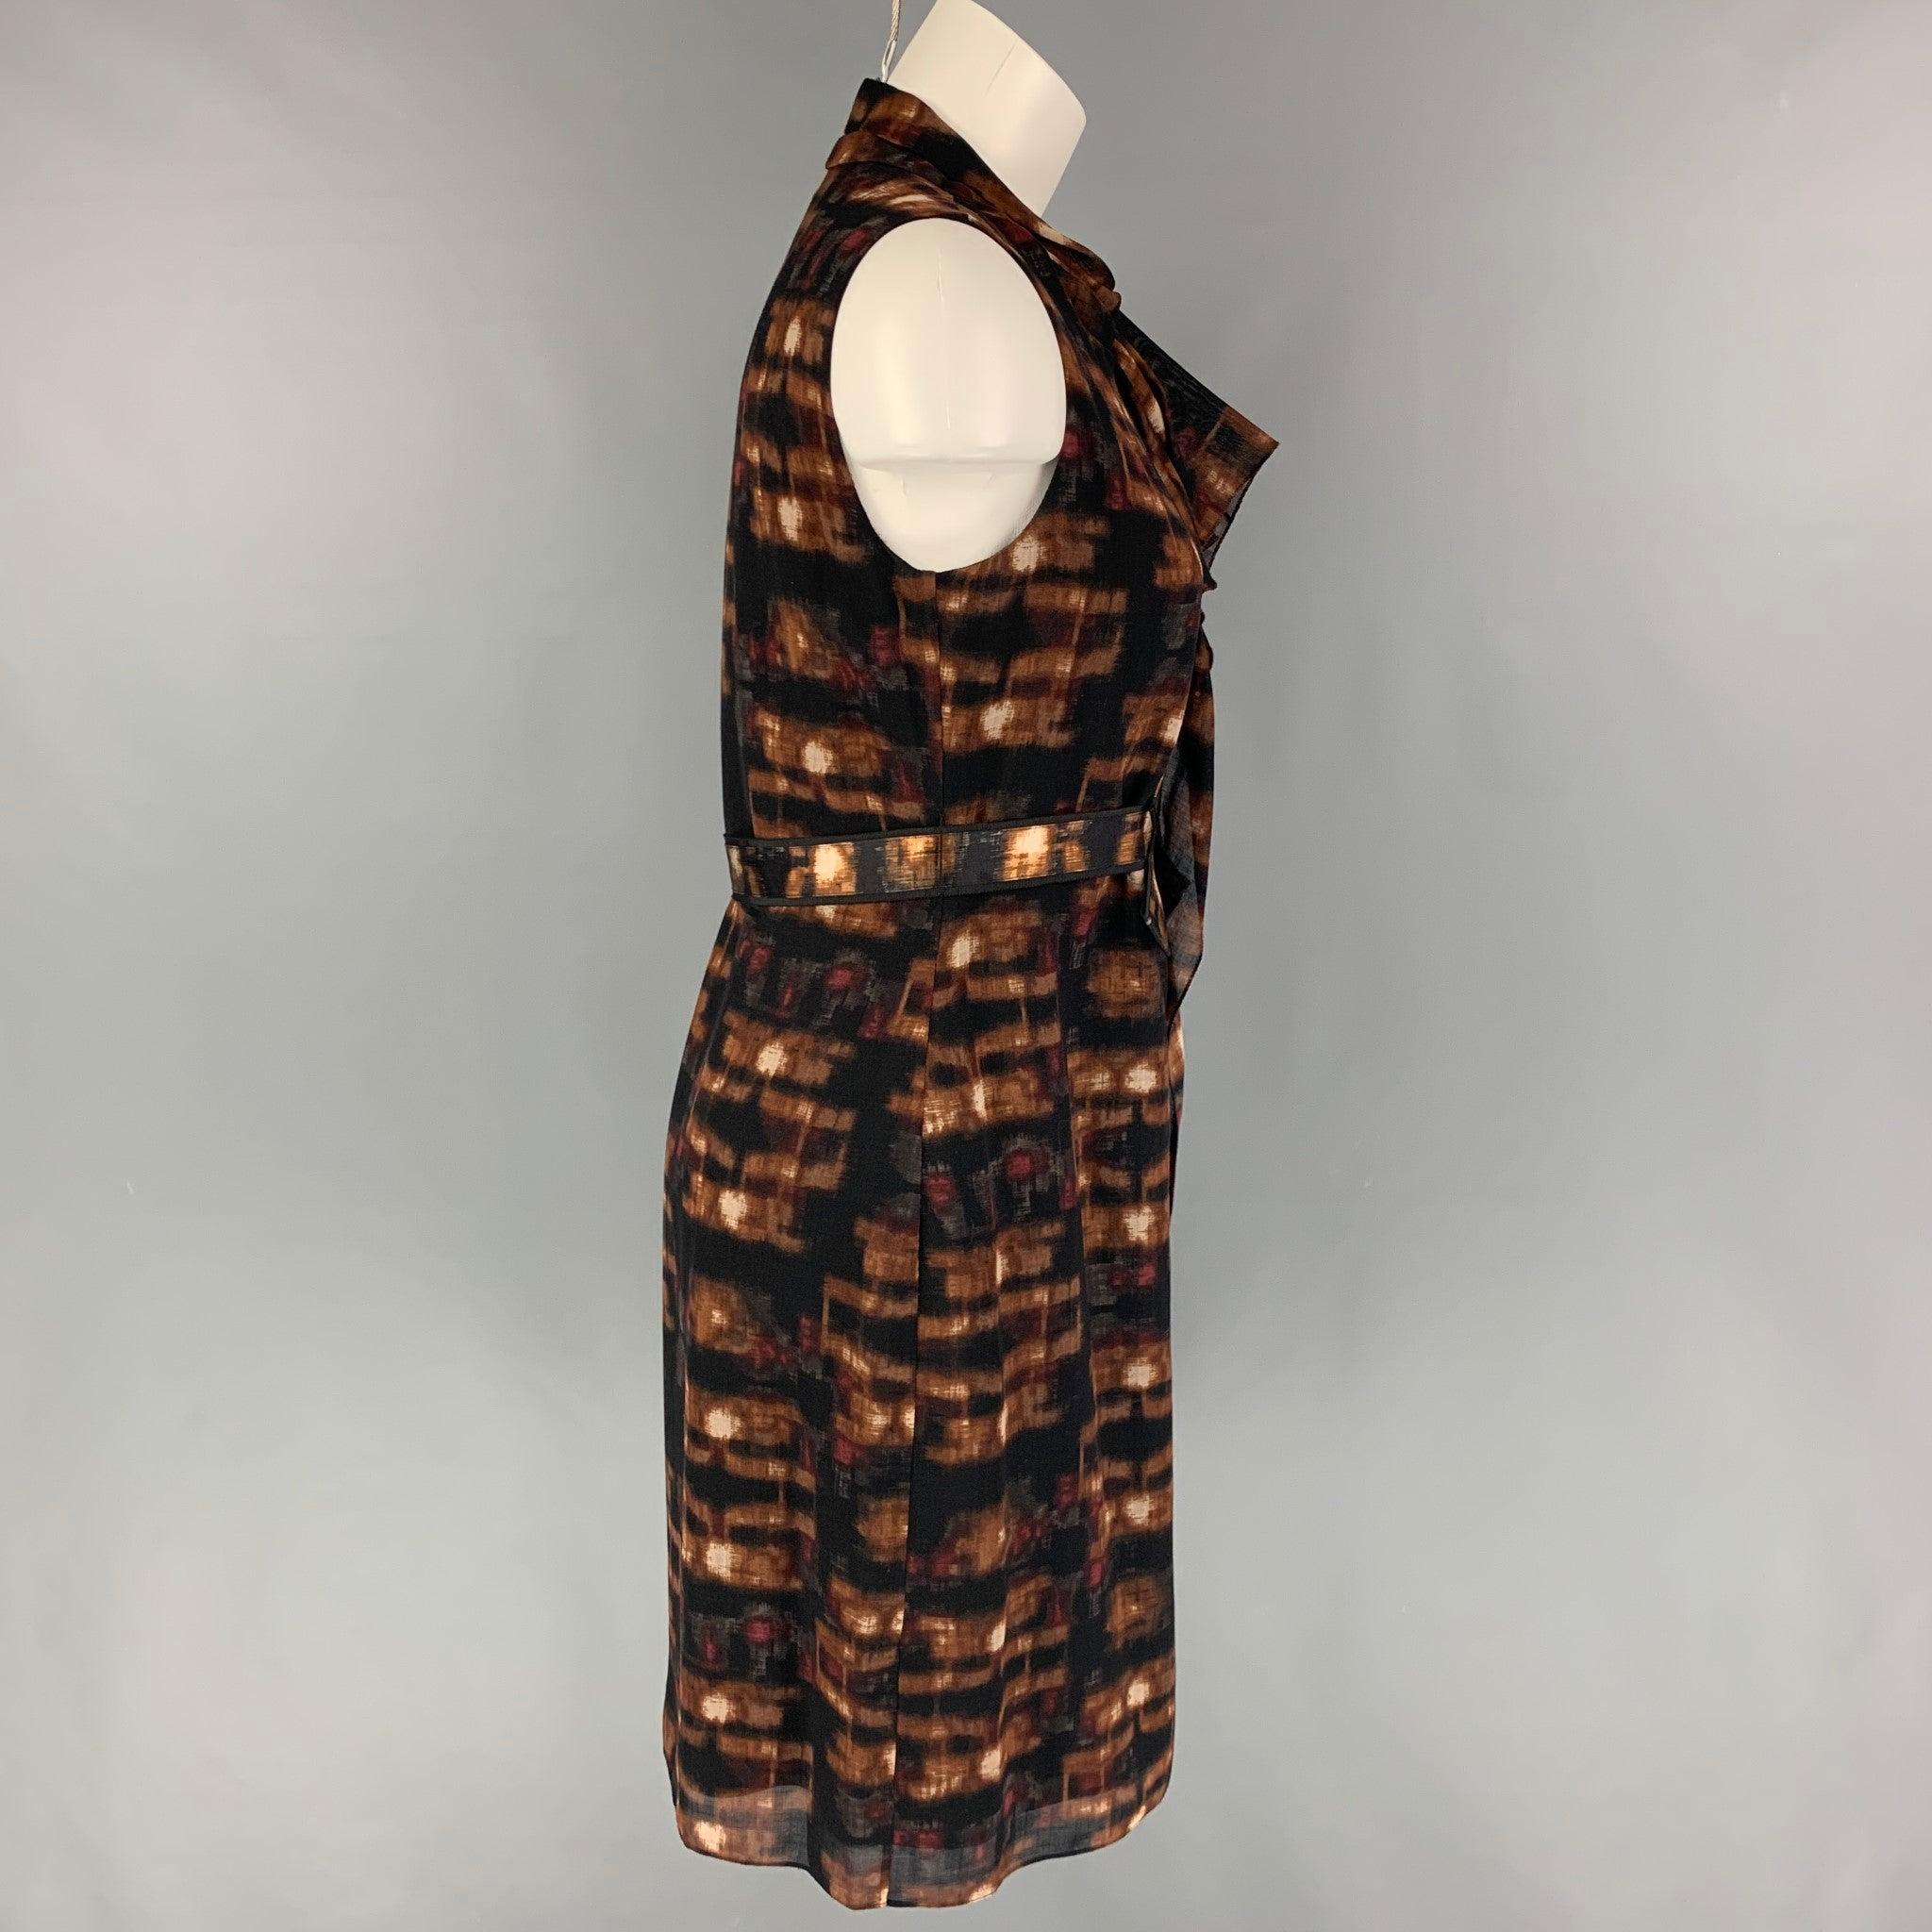 ELIE TAHARI dress comes in a brown & black marbled nylon featuring a sheath style, ruffled, belt detail, sleeveless, and a front zip up closure.
Very Good
Pre-Owned Condition. 

Marked:   6 

Measurements: 
 
Shoulder:
14 inches  Bust: 34 inches 